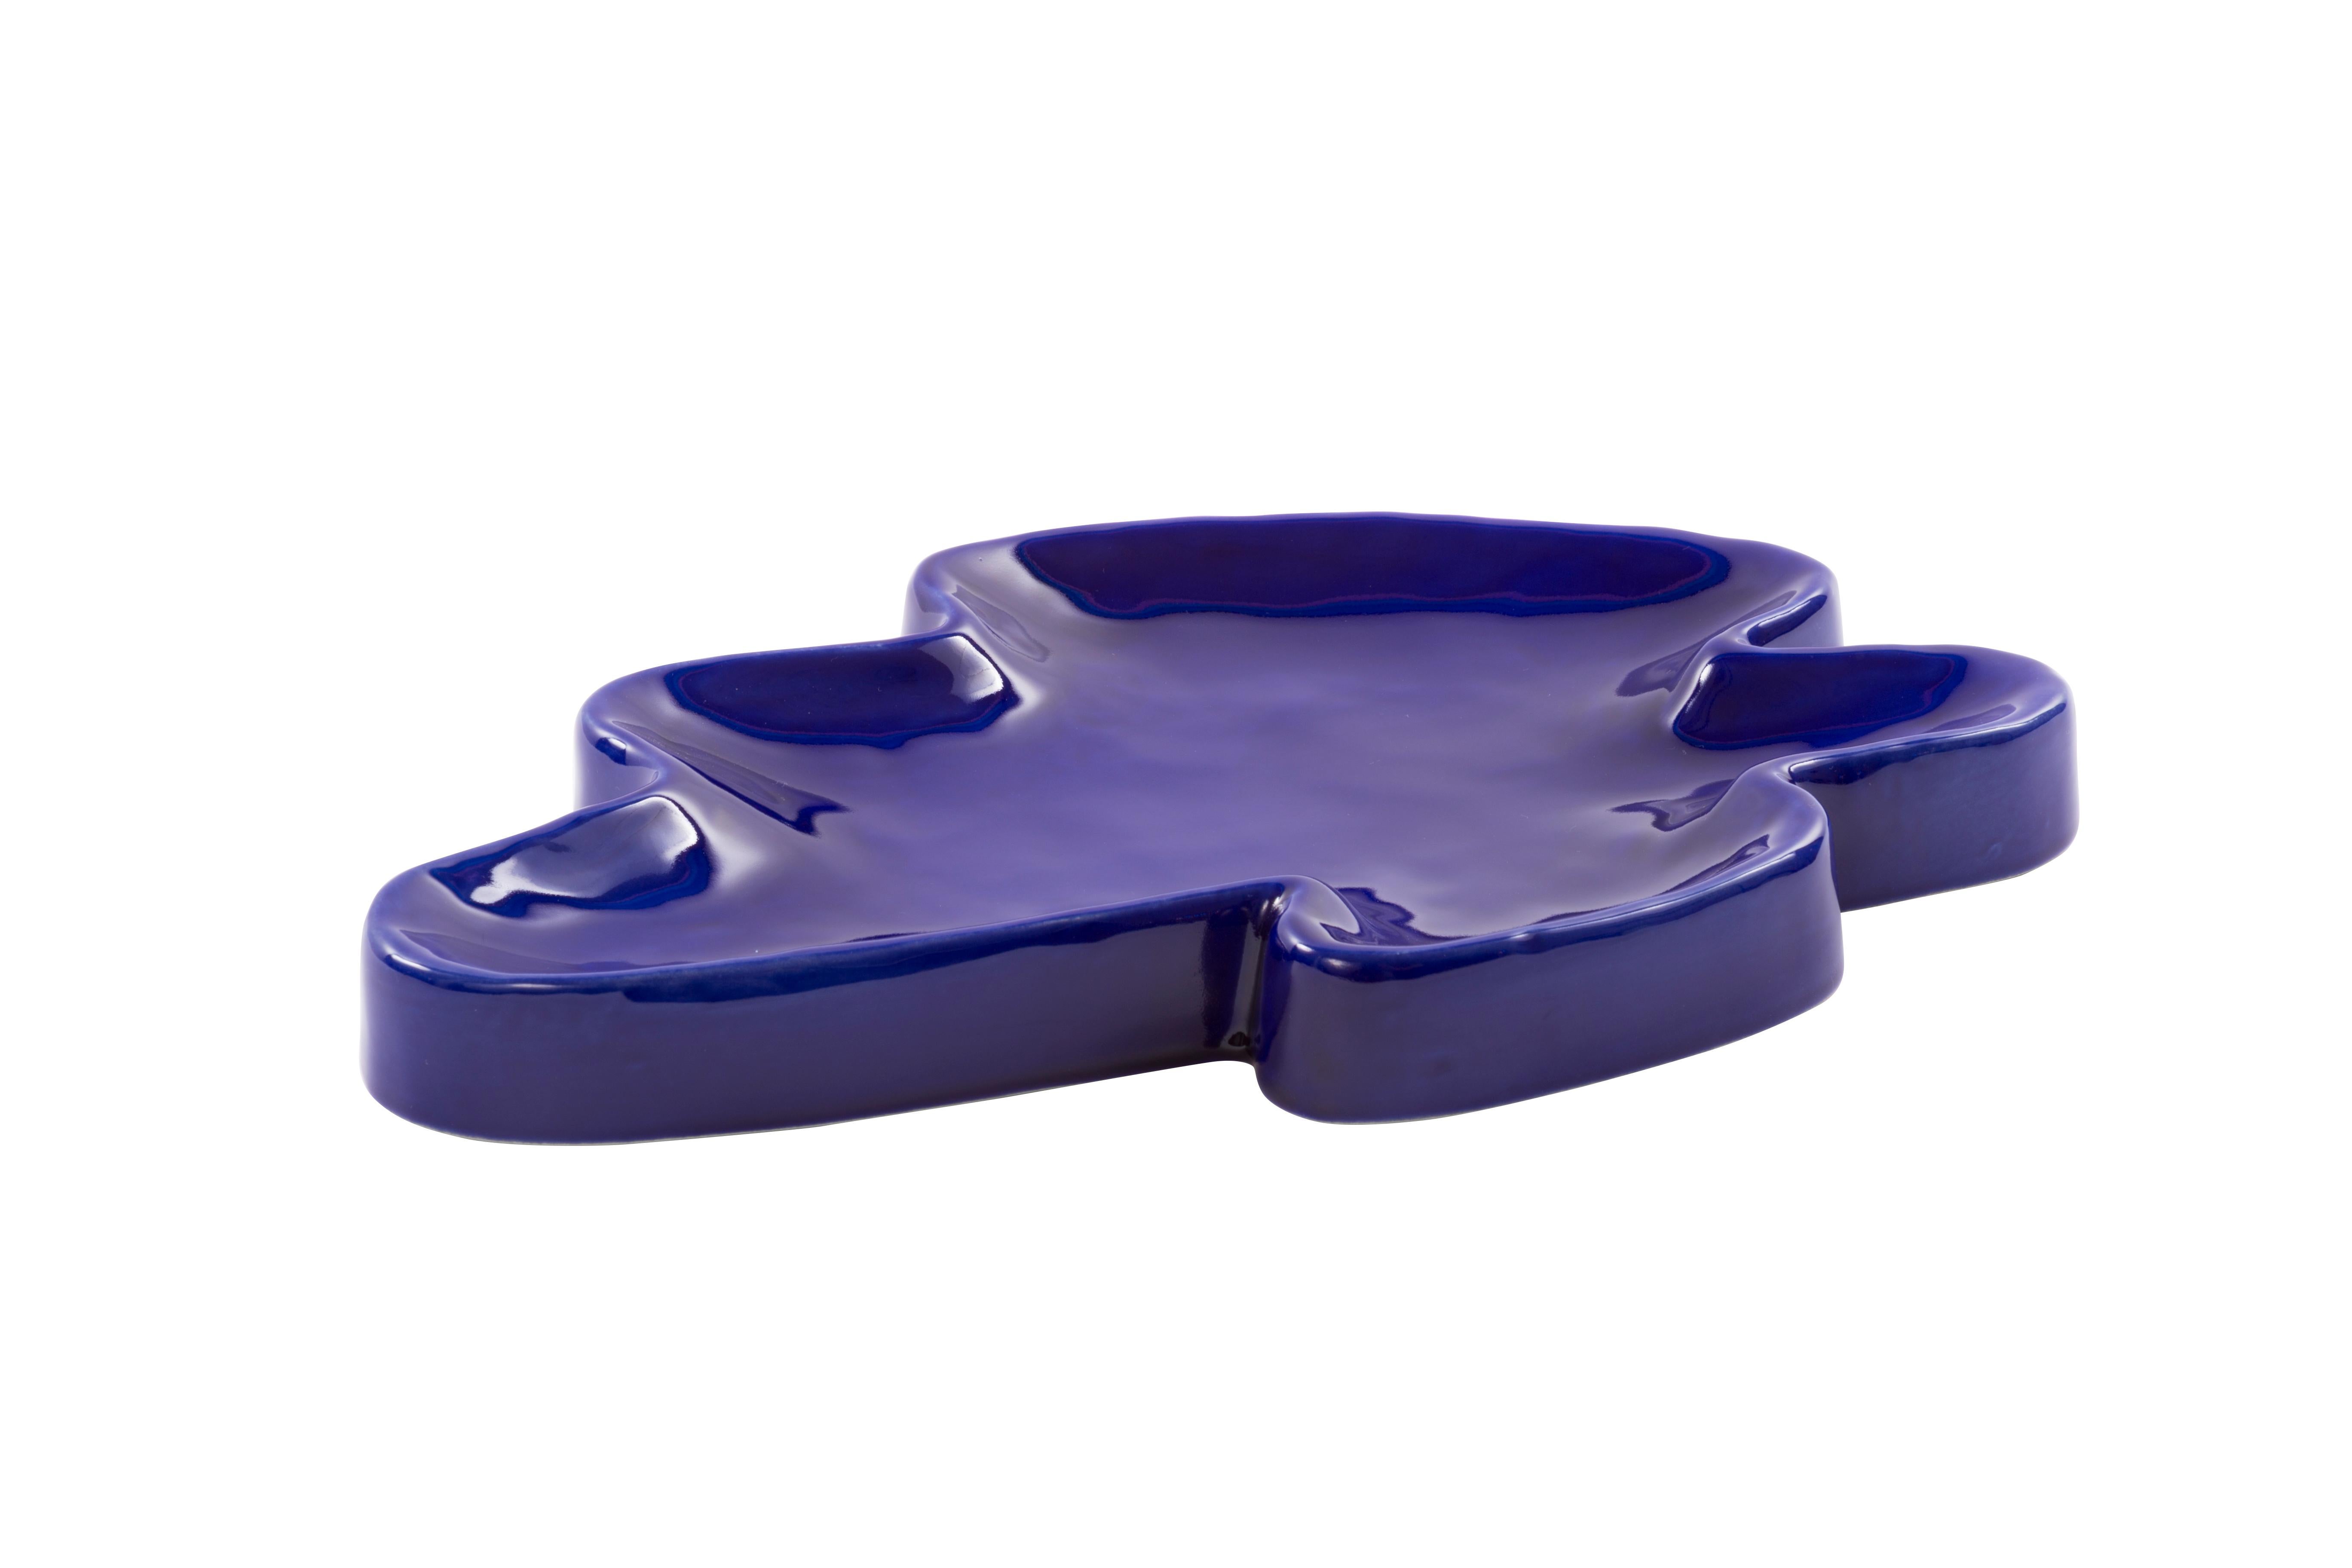 Lake big cobalt tray by Pulpo
Dimensions: D41 x W24 x H4 cm
Materials: Ceramic

Also available in different colours. 

These charming additions allow you to create a true tablescape environment; from the tones and textures of the urban